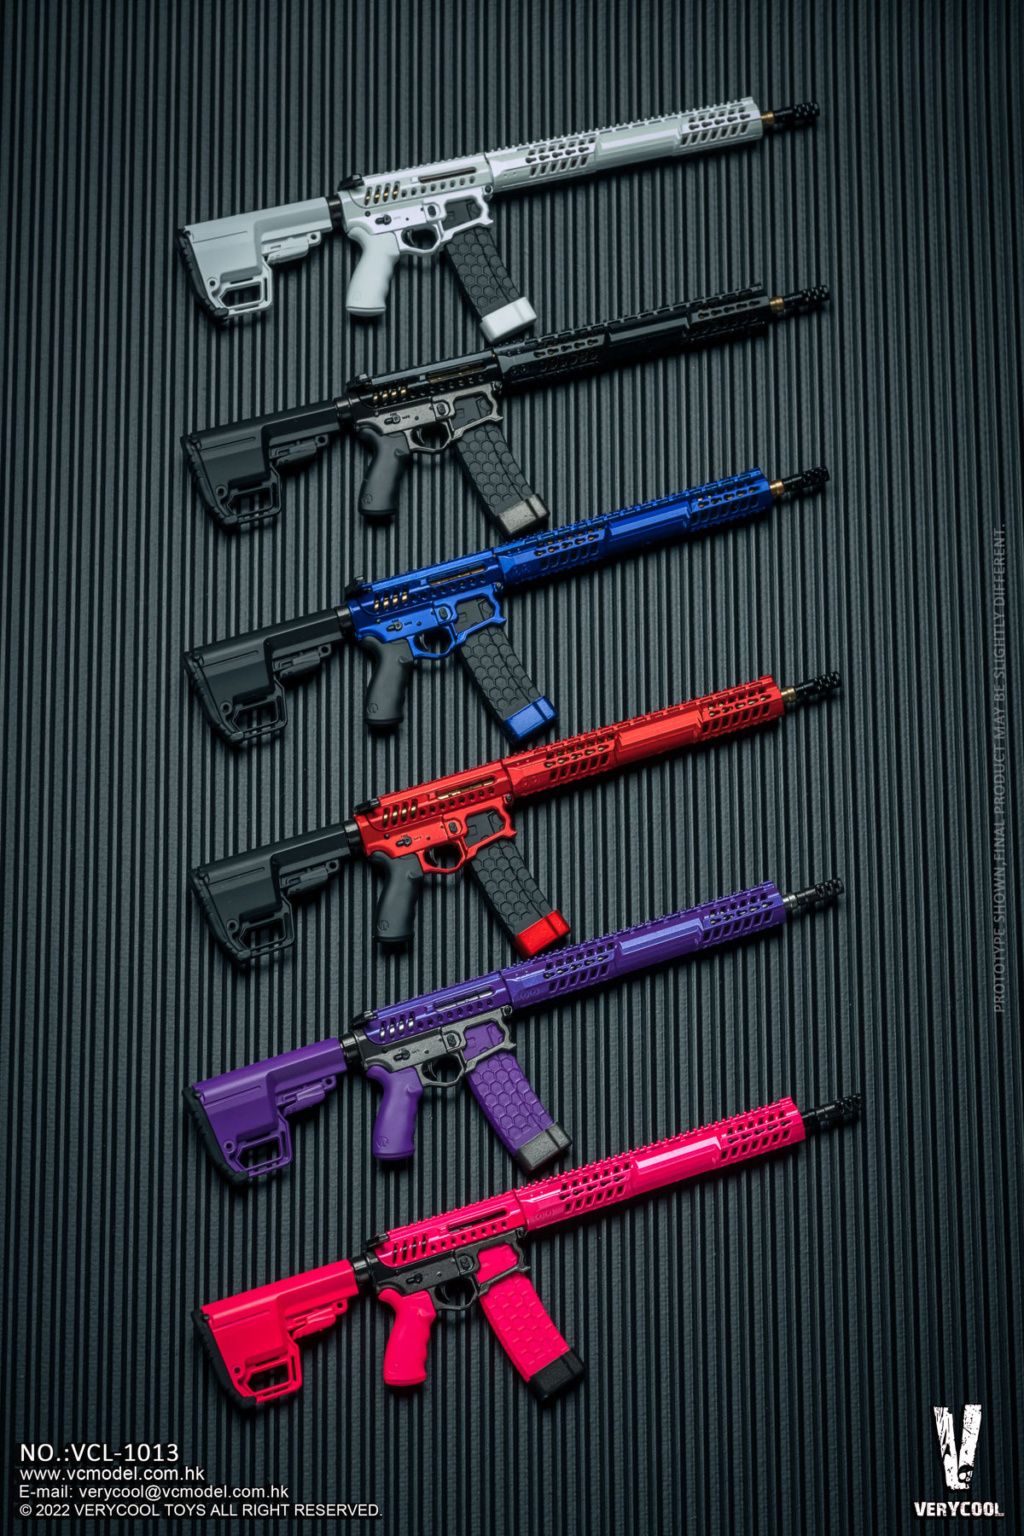 weaponset - NEW PRODUCT: Verycool: 1/6 Scale Weapon Set - 01 (6 Colors in total) #VCL-1013 14464011